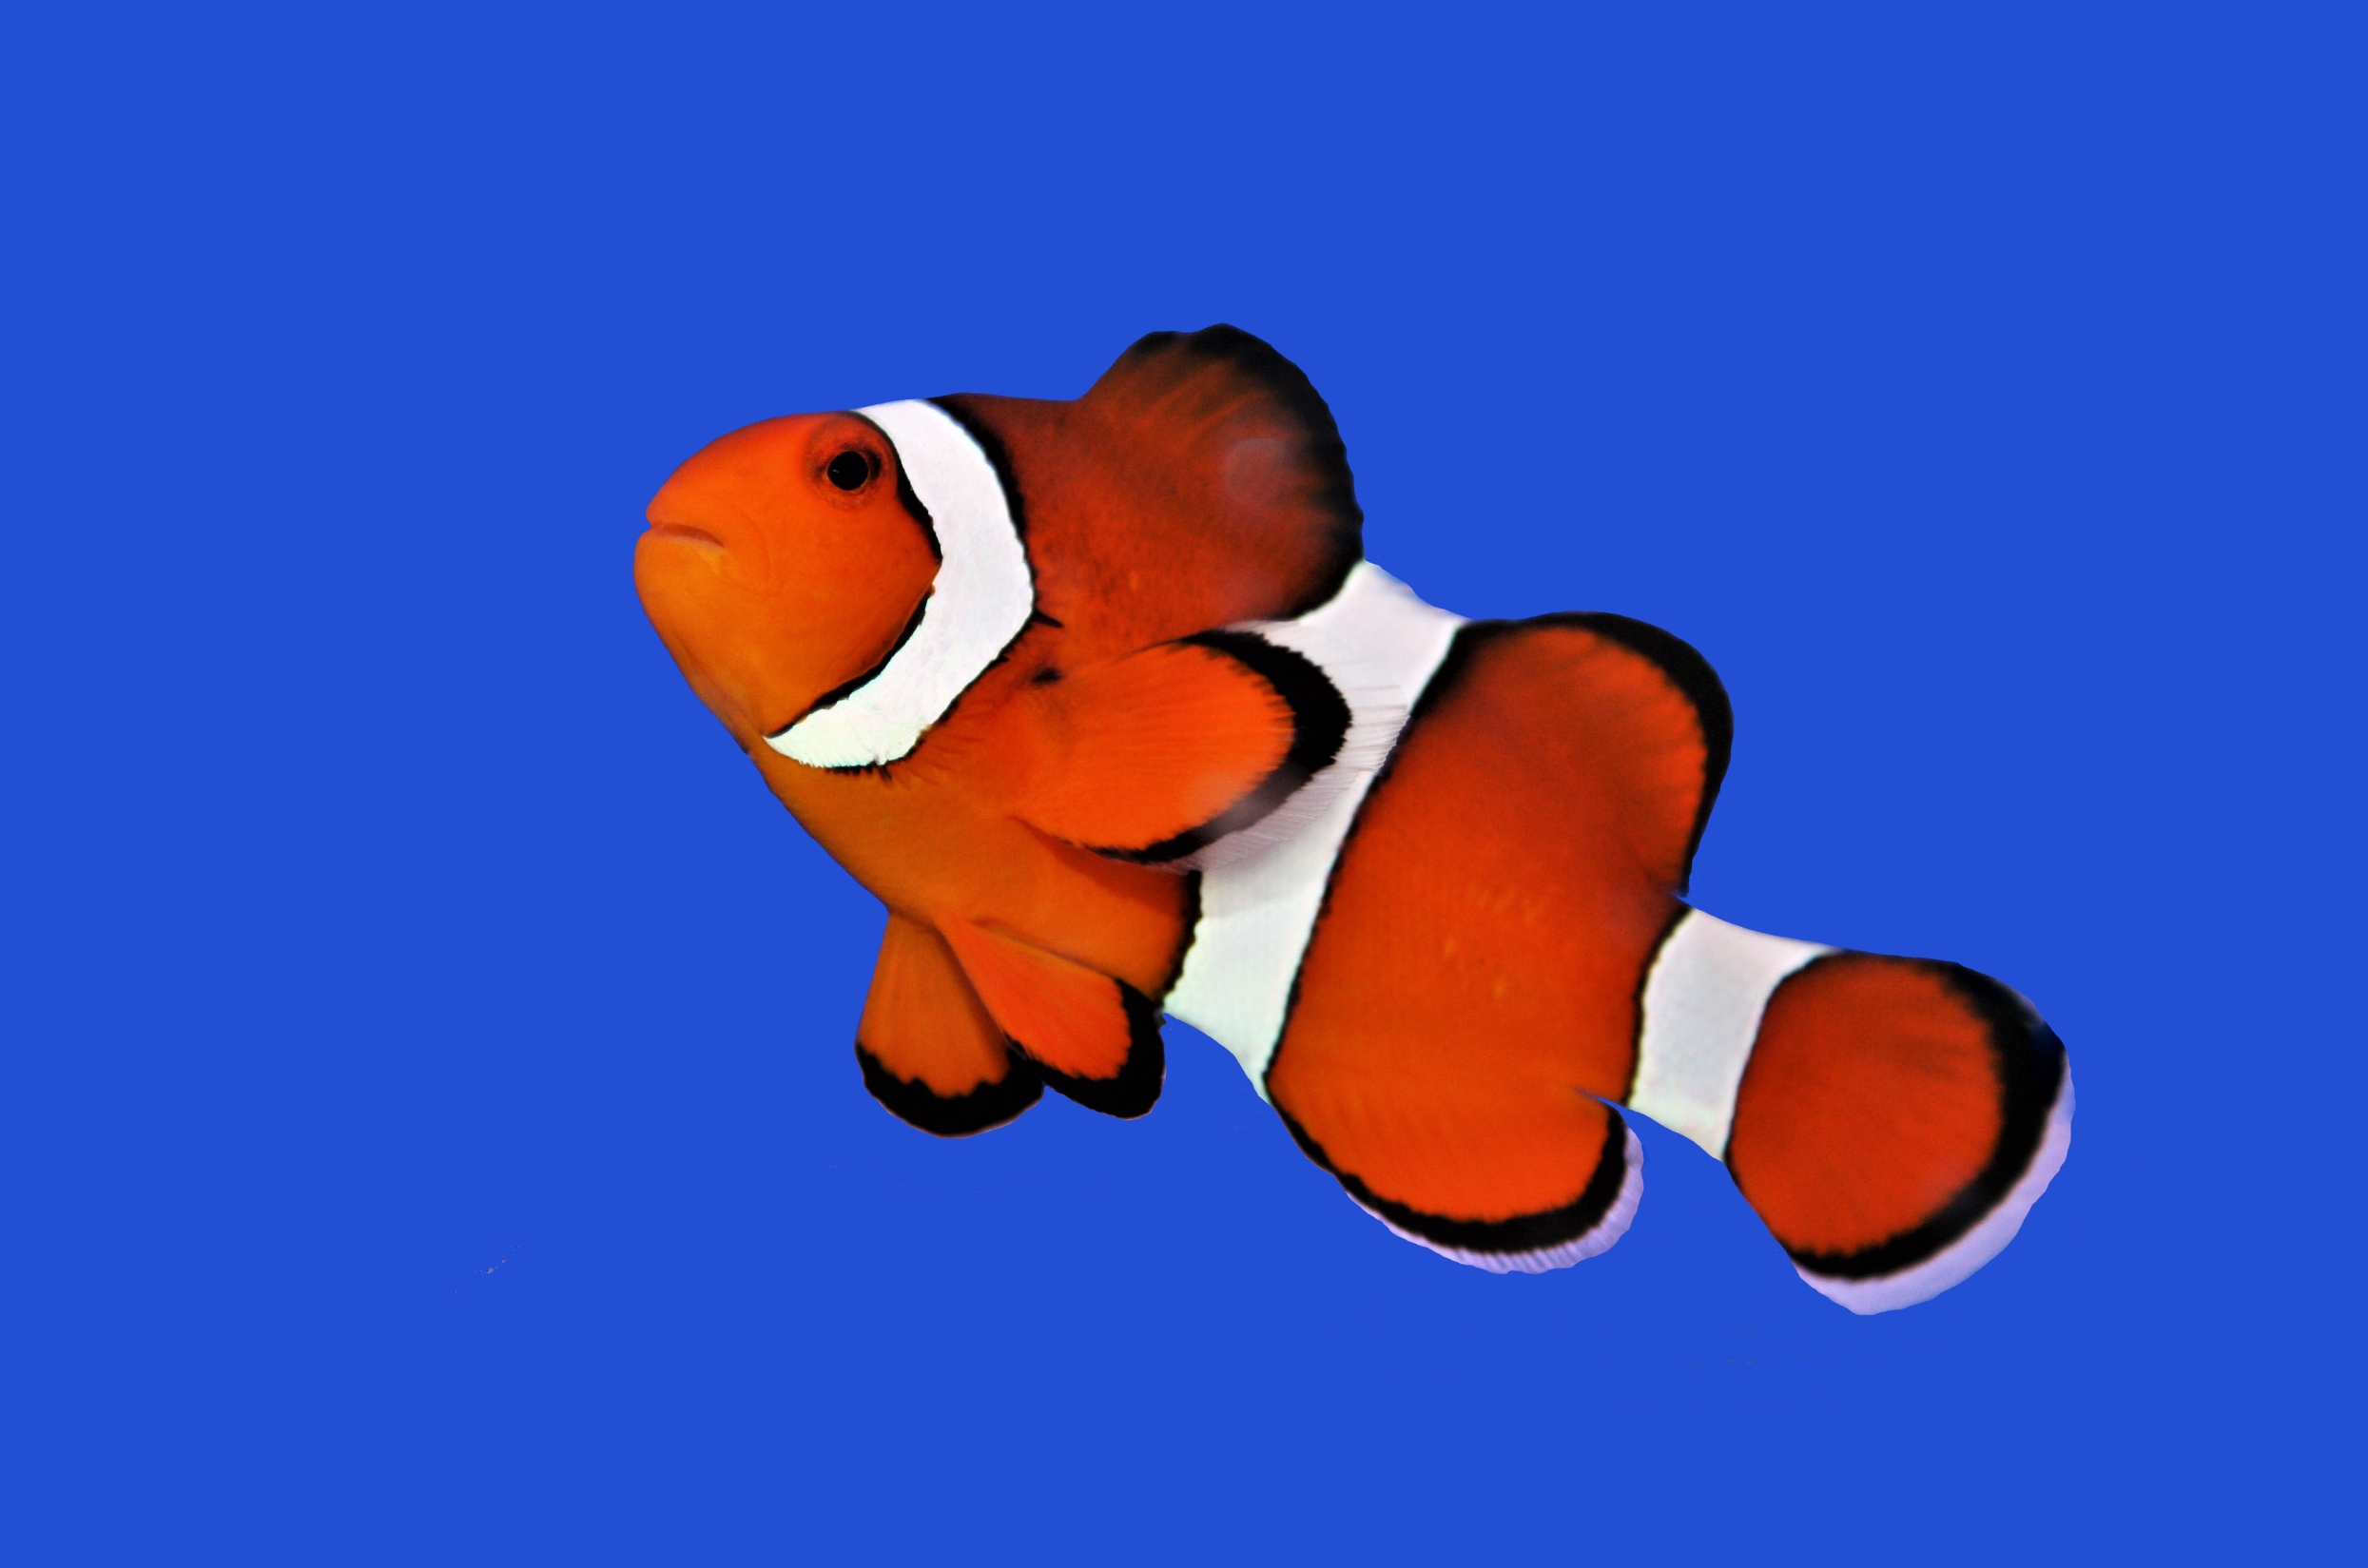 The orange clownfish (percula clownfish,clown anemonefish, anemonefishes) on isolated blue background. Amphiprion percula is widely known as a popular aquarium fish.